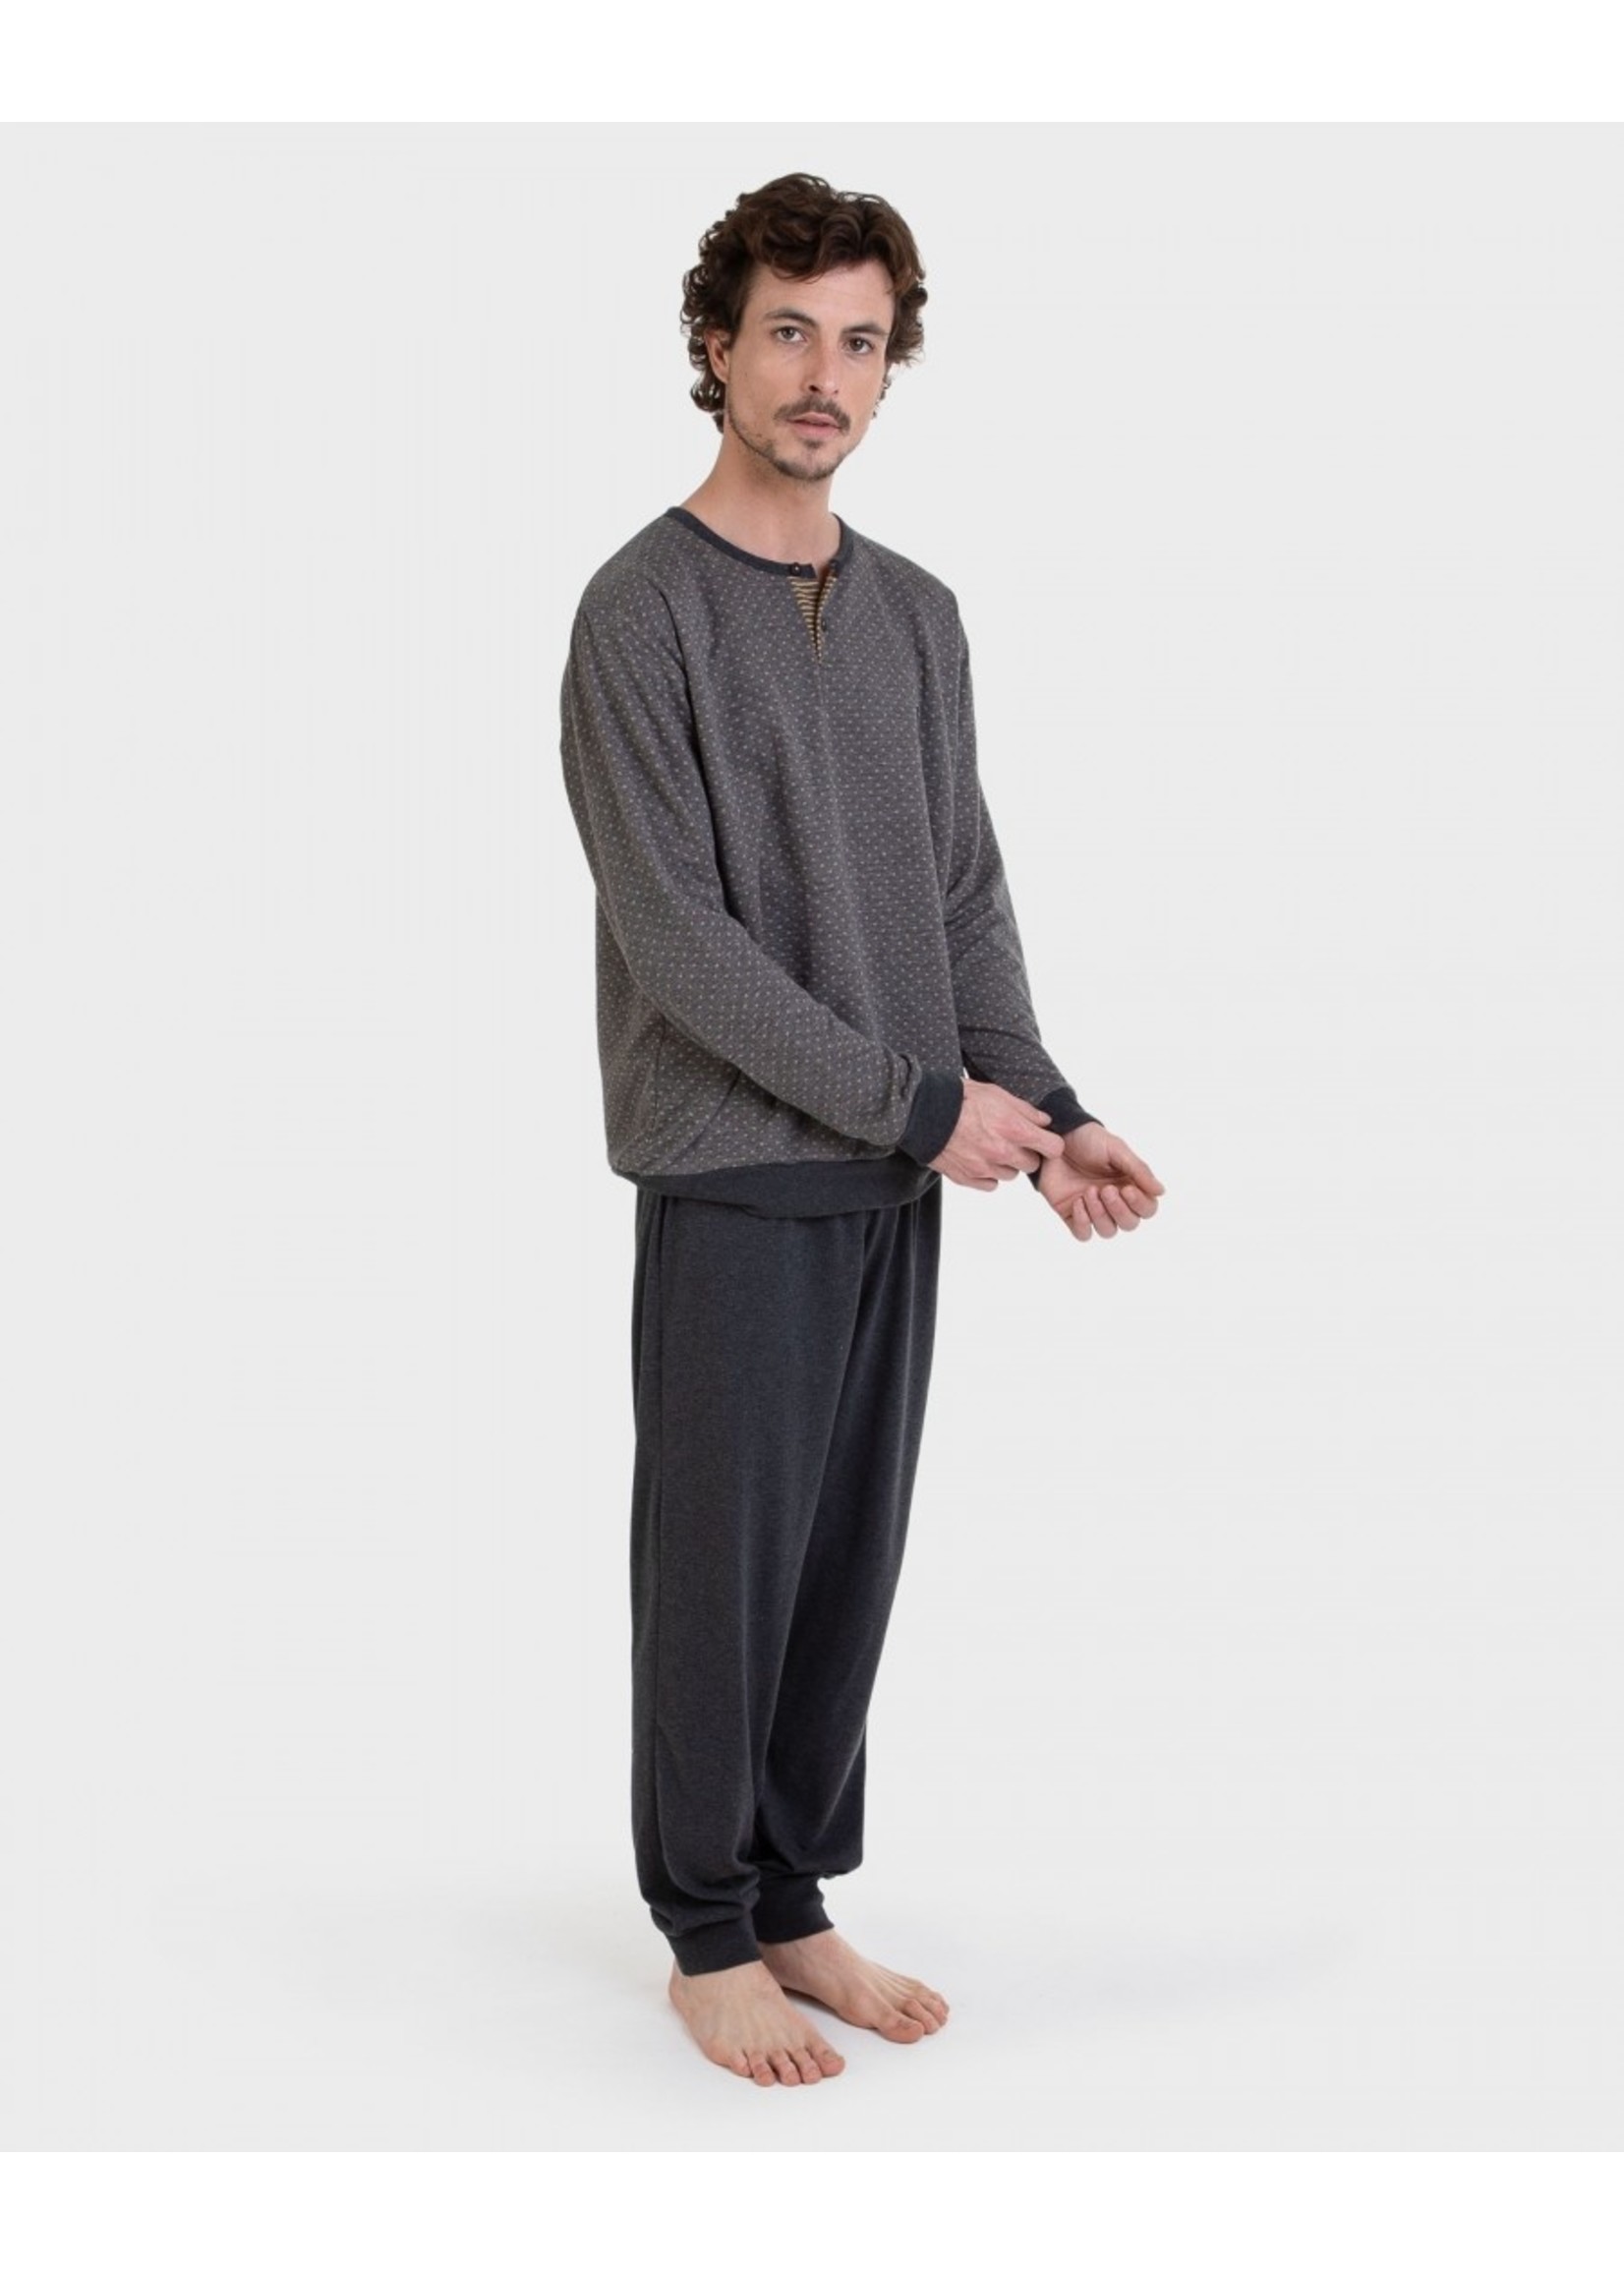 MASSANA Men's loungewear with col henley tee and long pant